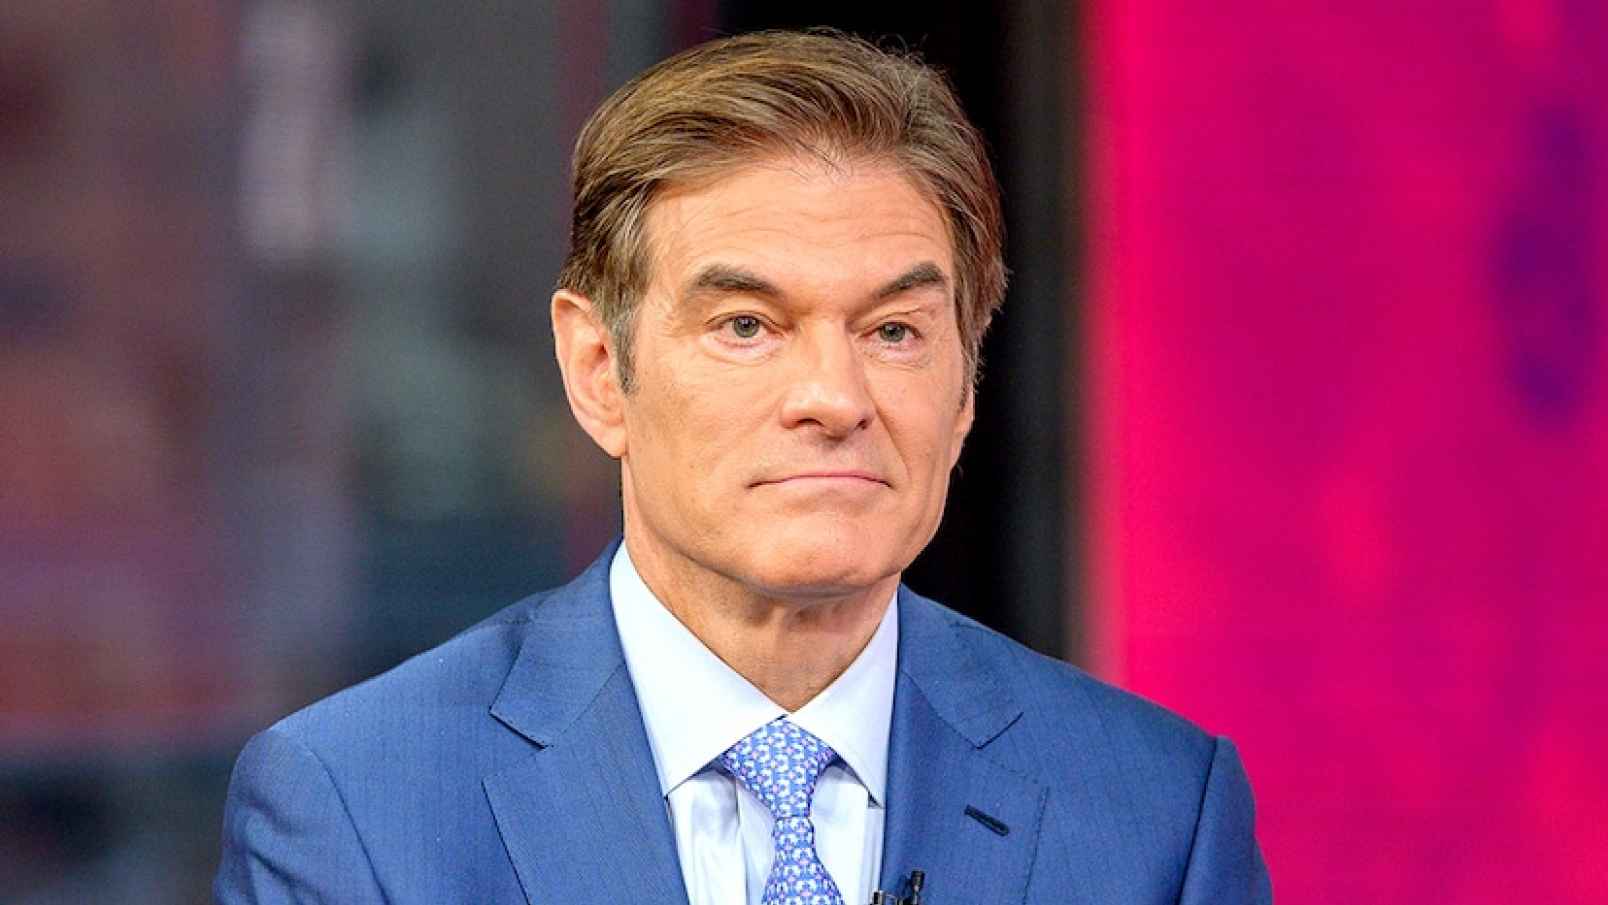 Dr. Oz Wants His Senate Race Opponent Barred From the Race for Thought-Crime | FrontpageMag